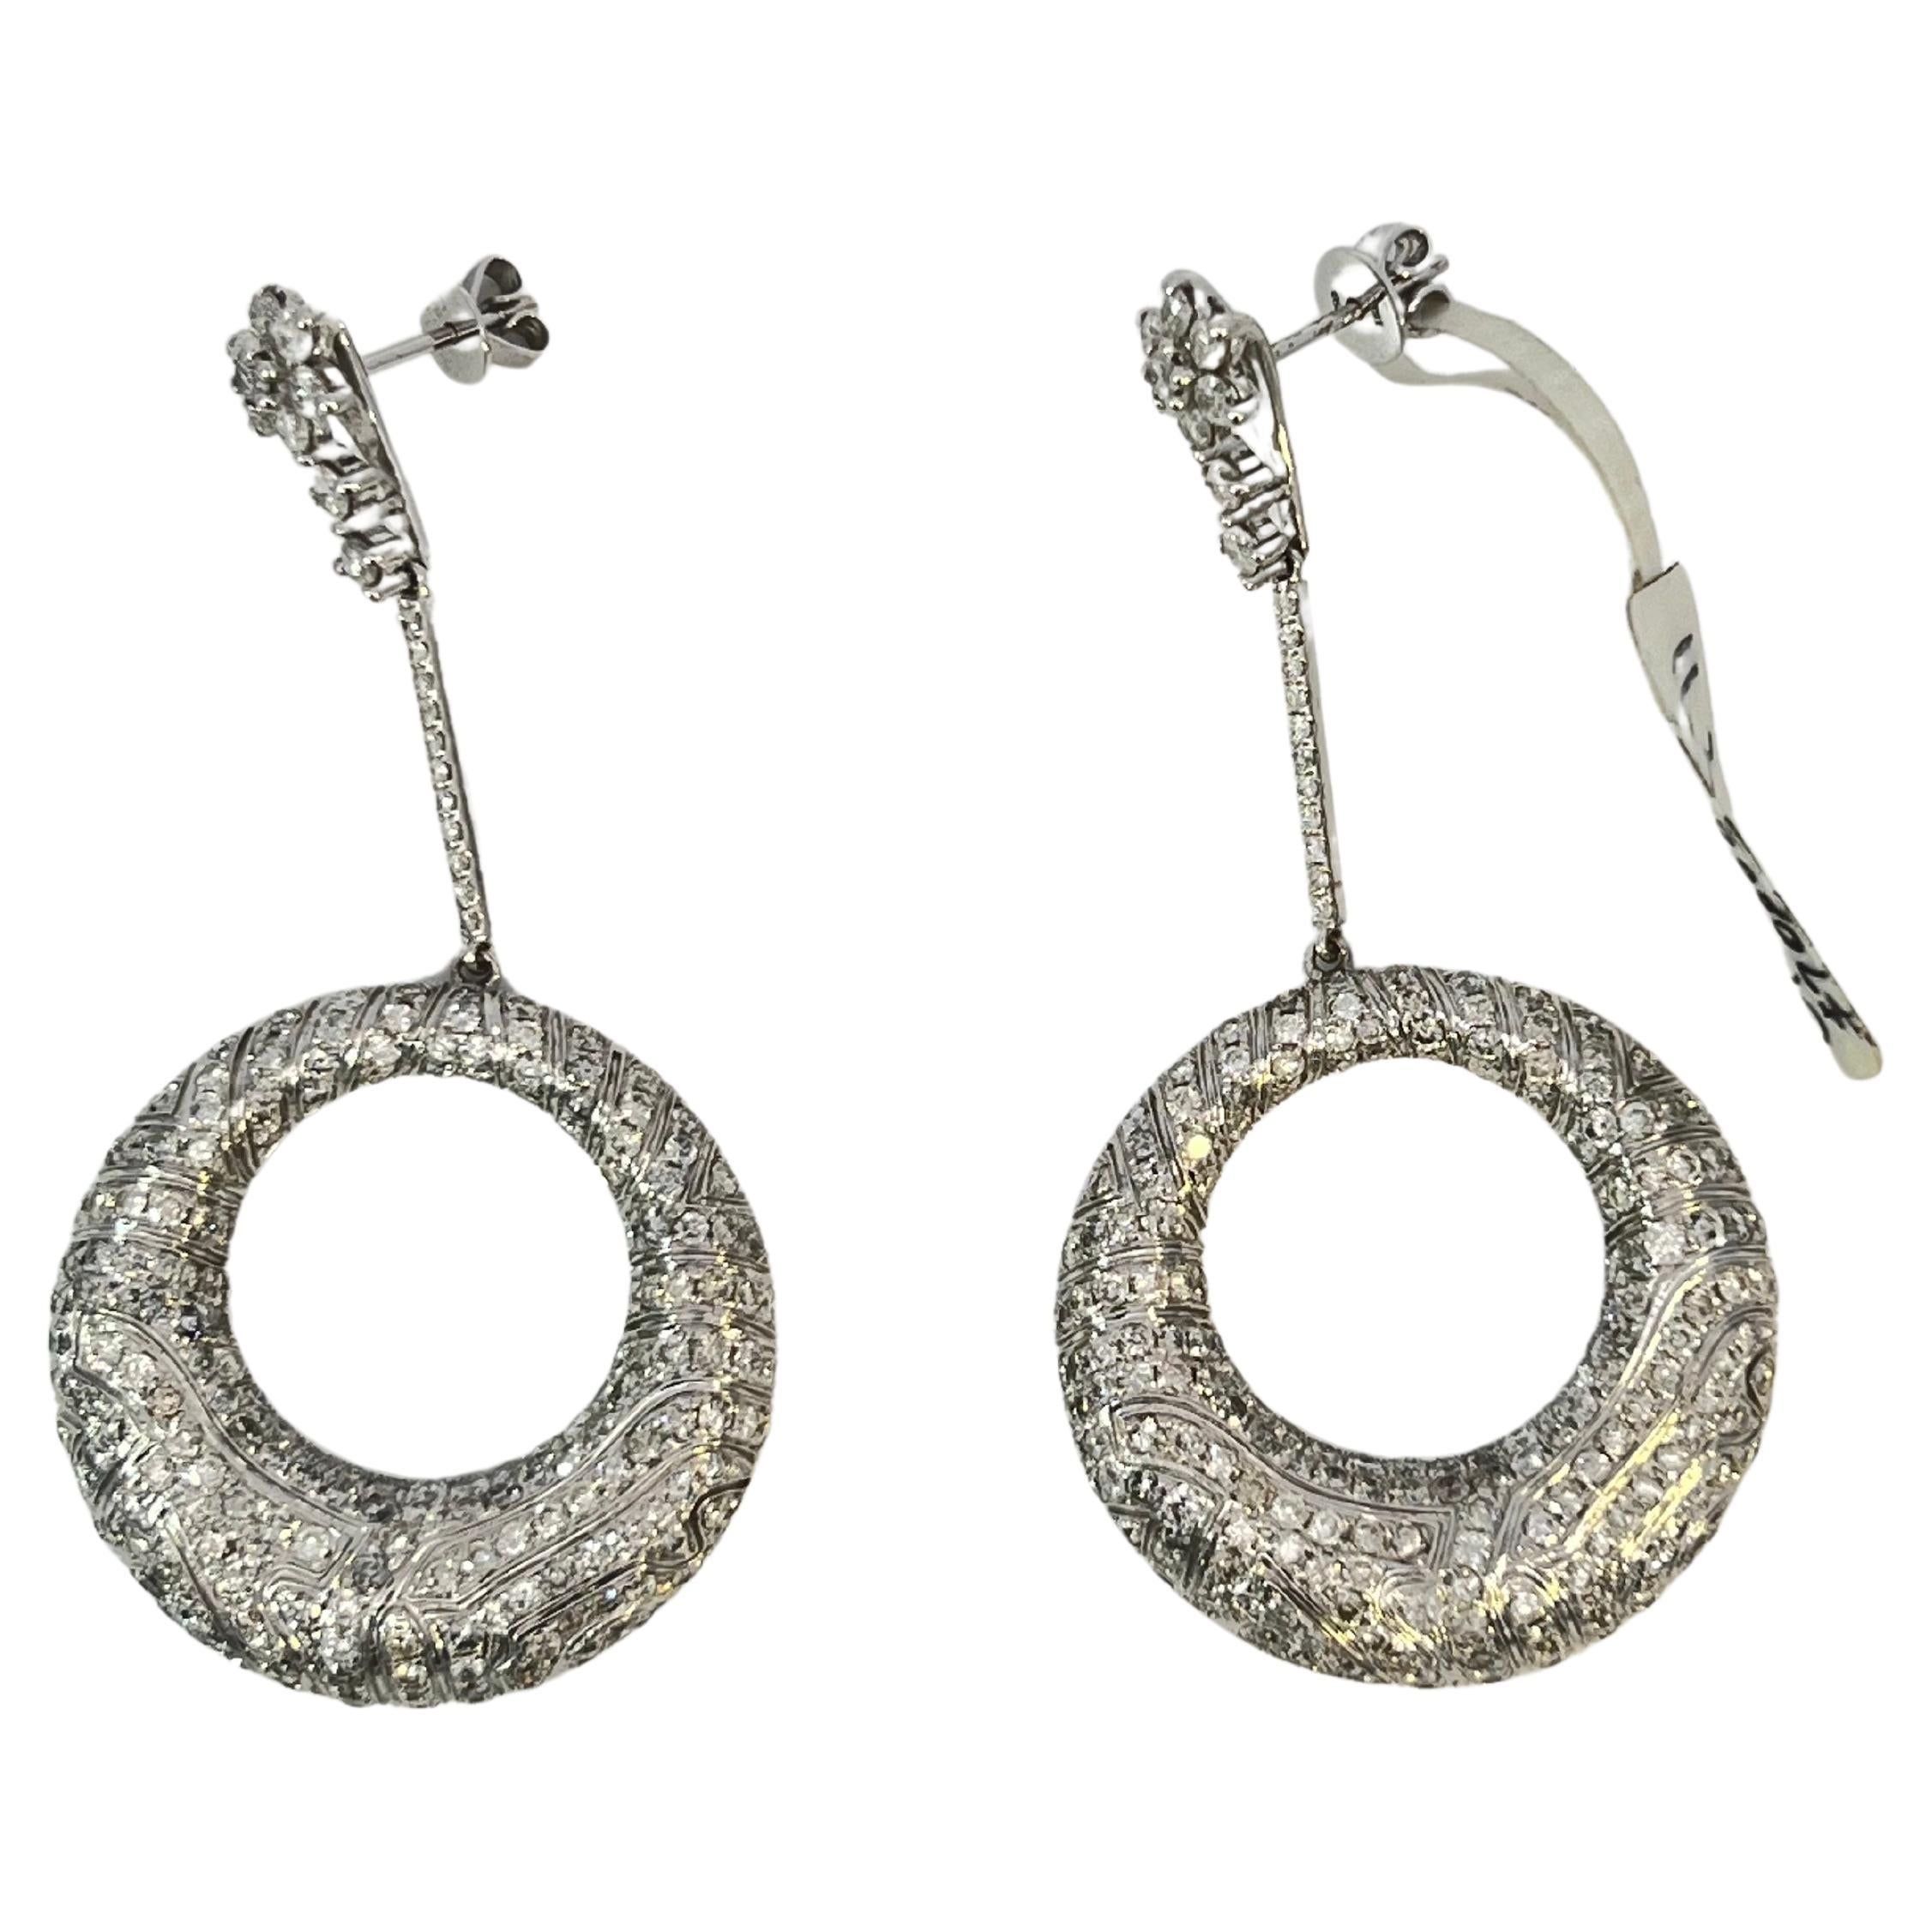 This amazing star moon-light dangle chandelier earring is a true masterpiece that exudes glamour and luxury. The earrings feature over 600 natural diamonds that weigh an impressive 11.45 carats. The diamonds are of the highest quality, with a